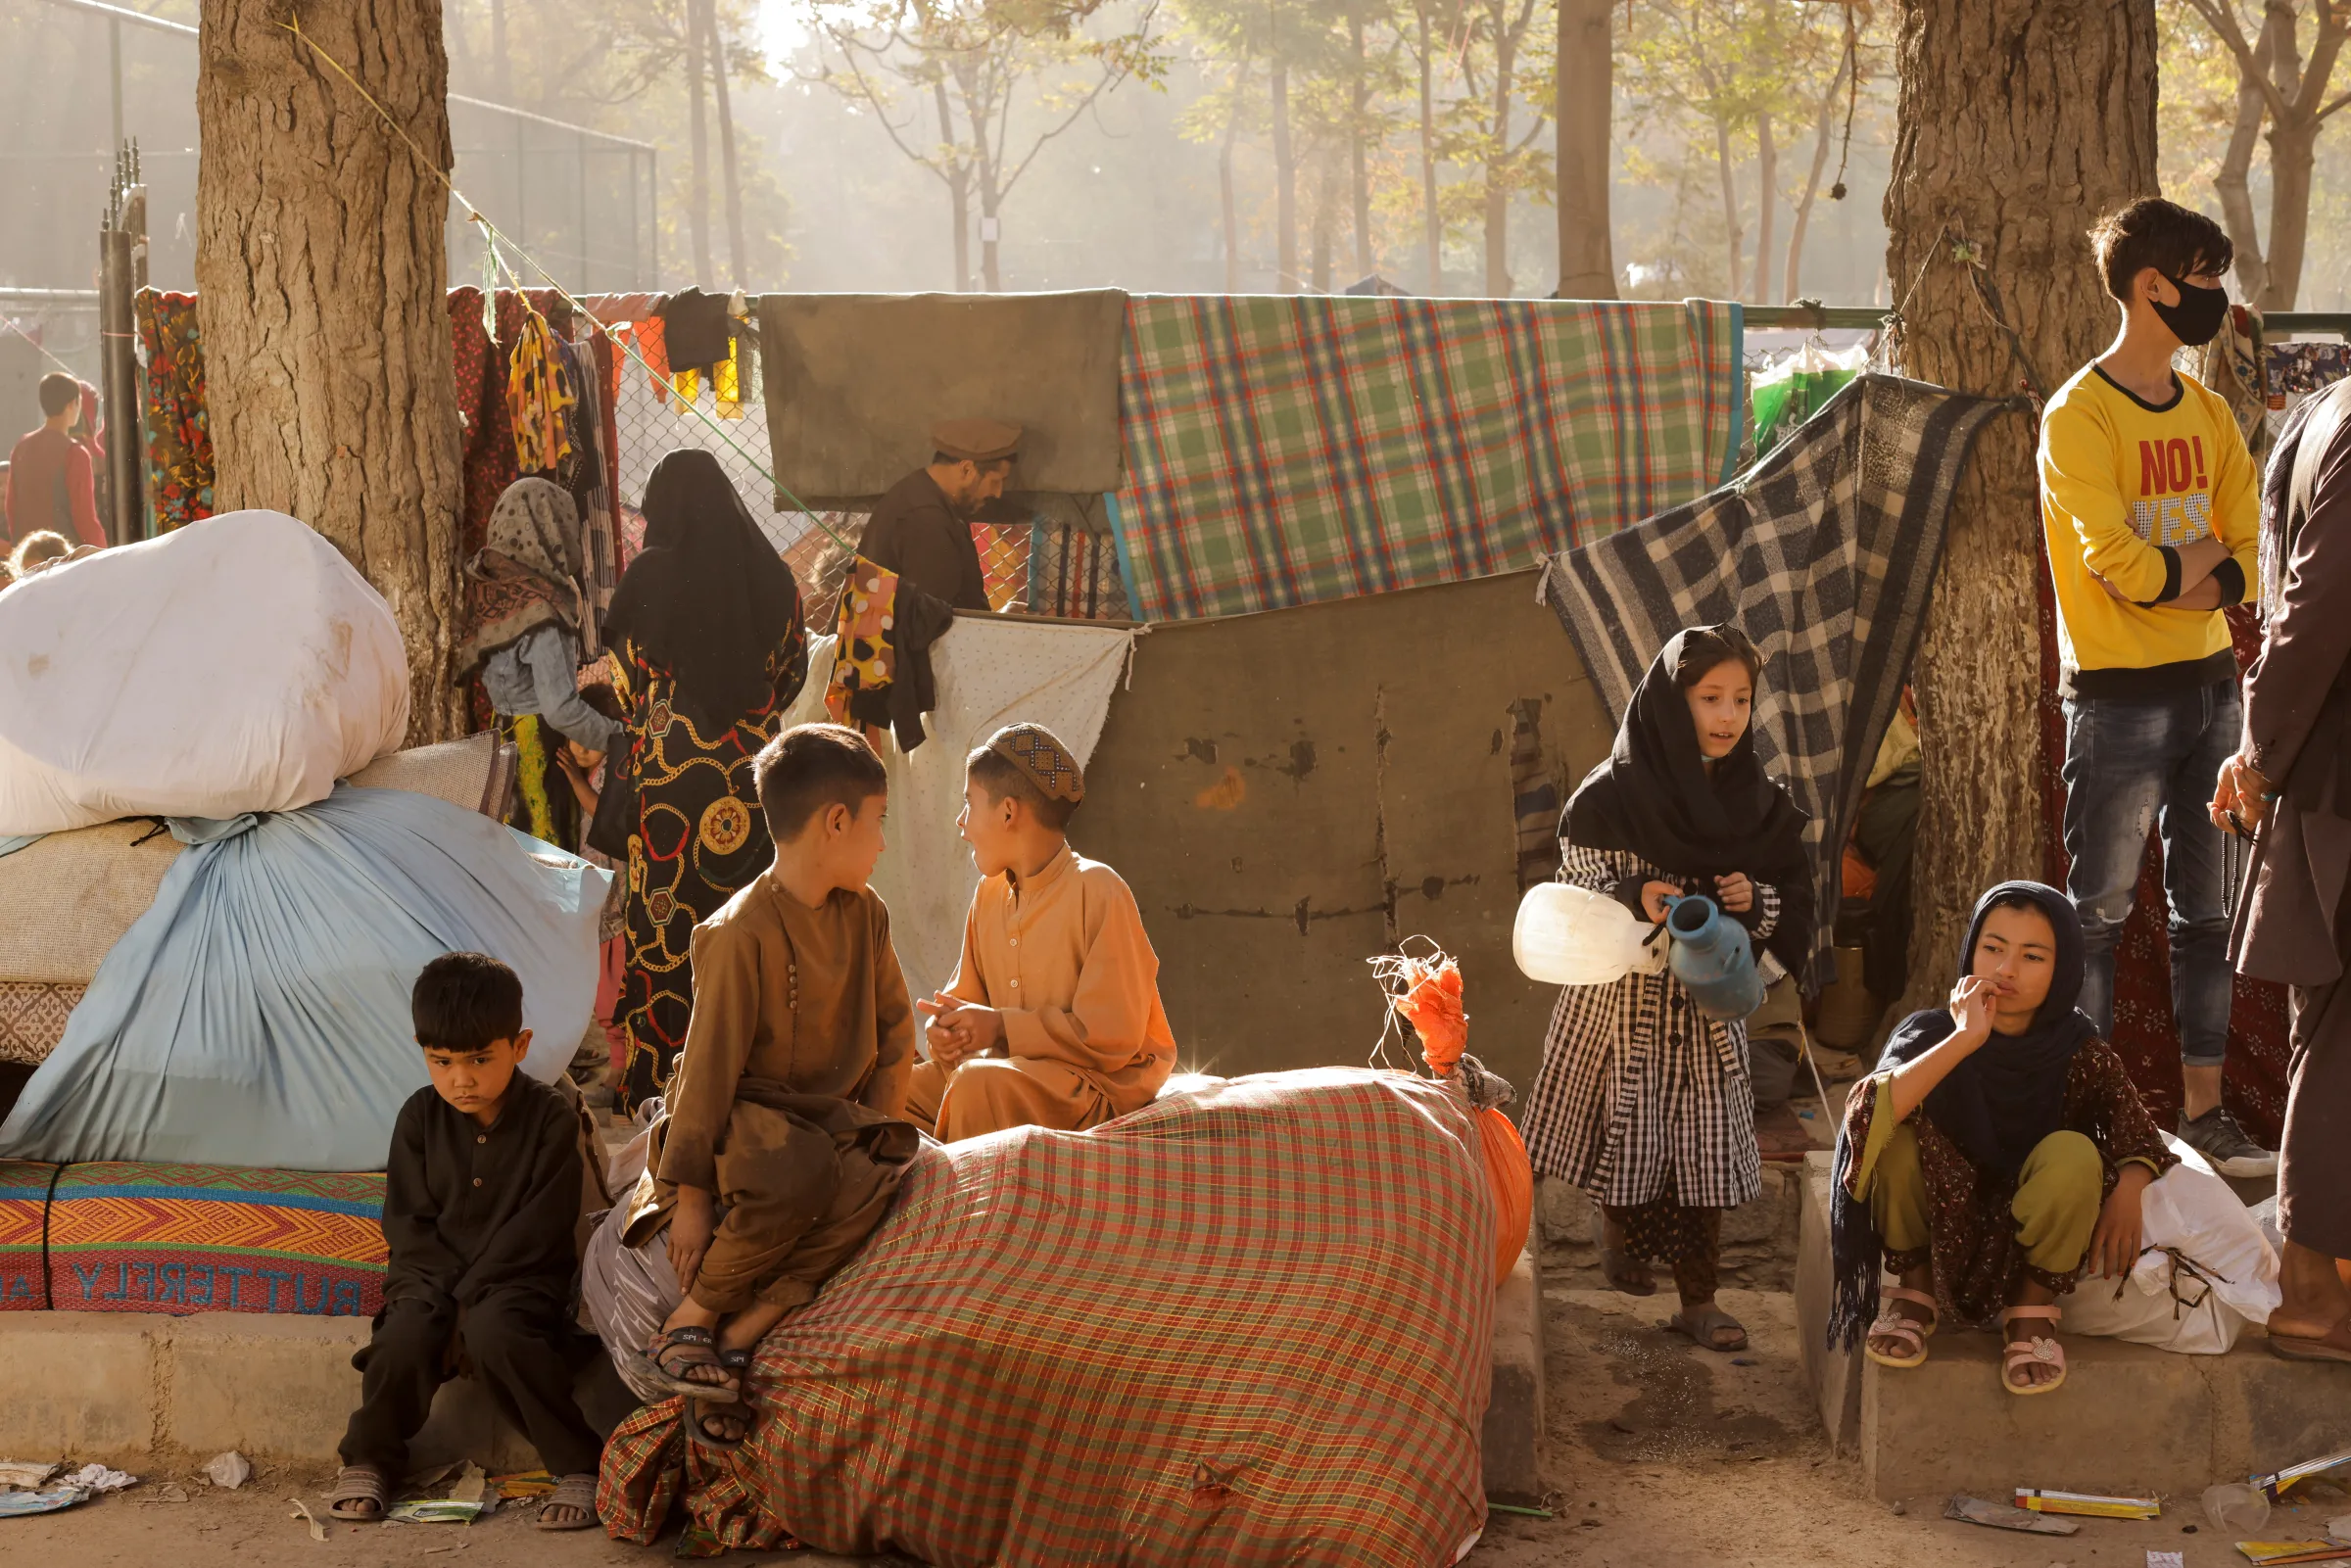 Afghan families, who are among displaced people fleeing the violence in their provinces, sit with their belongings as they prepare to return to their provinces, at a makeshift shelter at Shahr-e Naw park, in Kabul, Afghanistan October 4, 2021